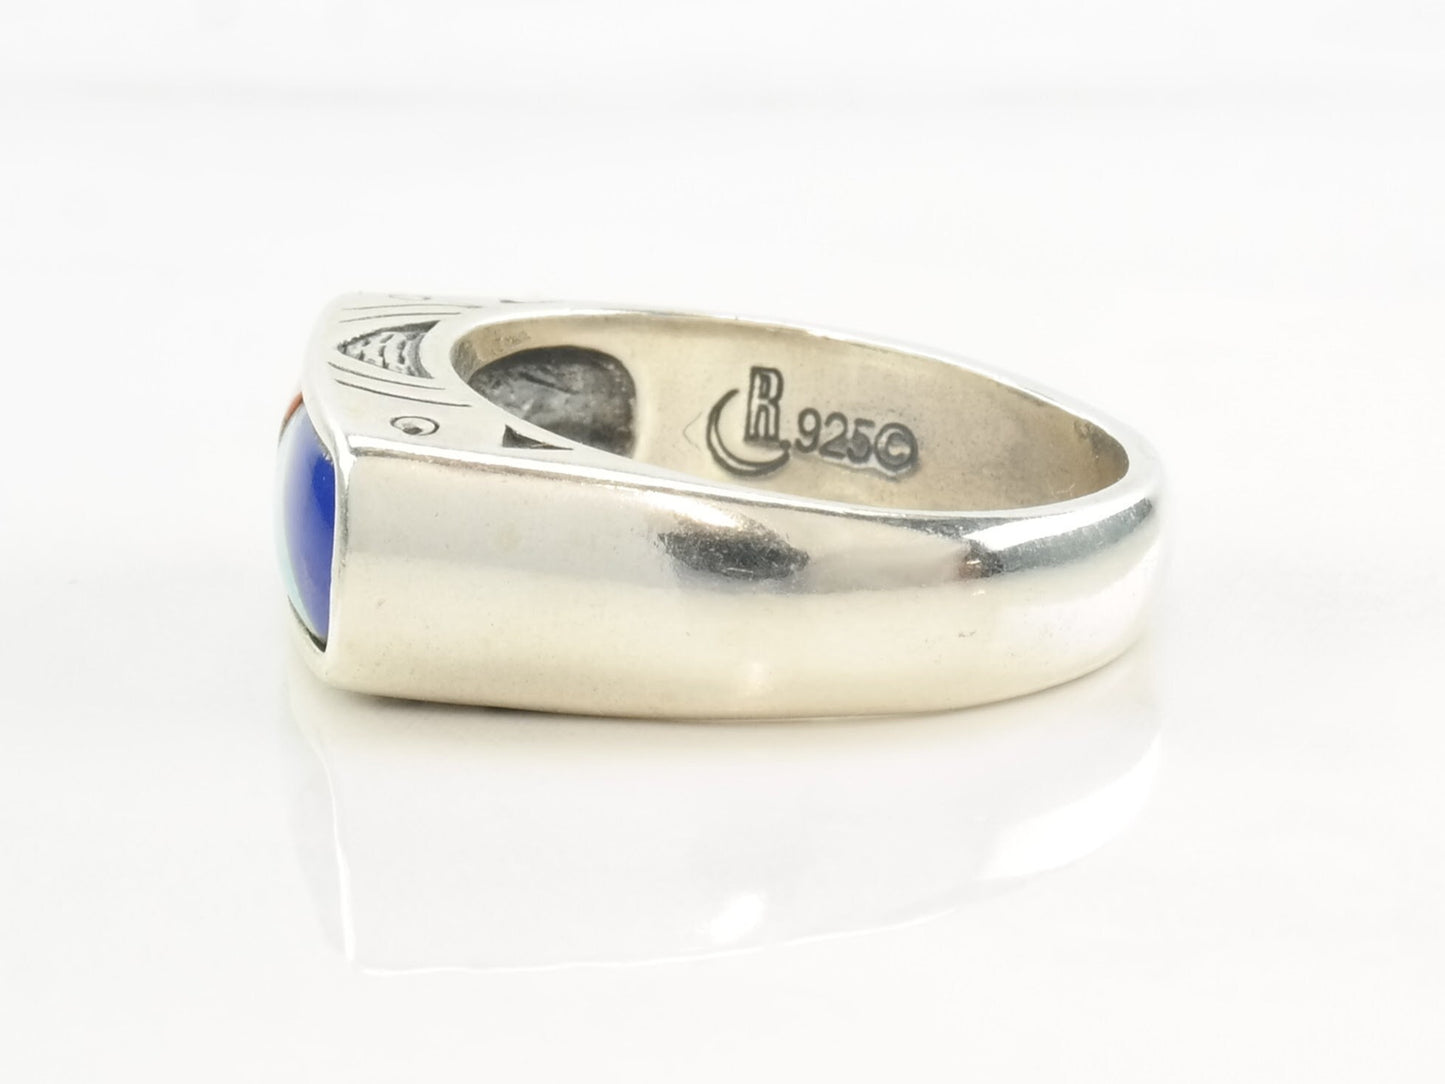 Vintage Carolyn Pollack Ring Spiny Oyster, Turquoise, Lapis Lazuli Inlay Sterling Silver Size 6 1/4